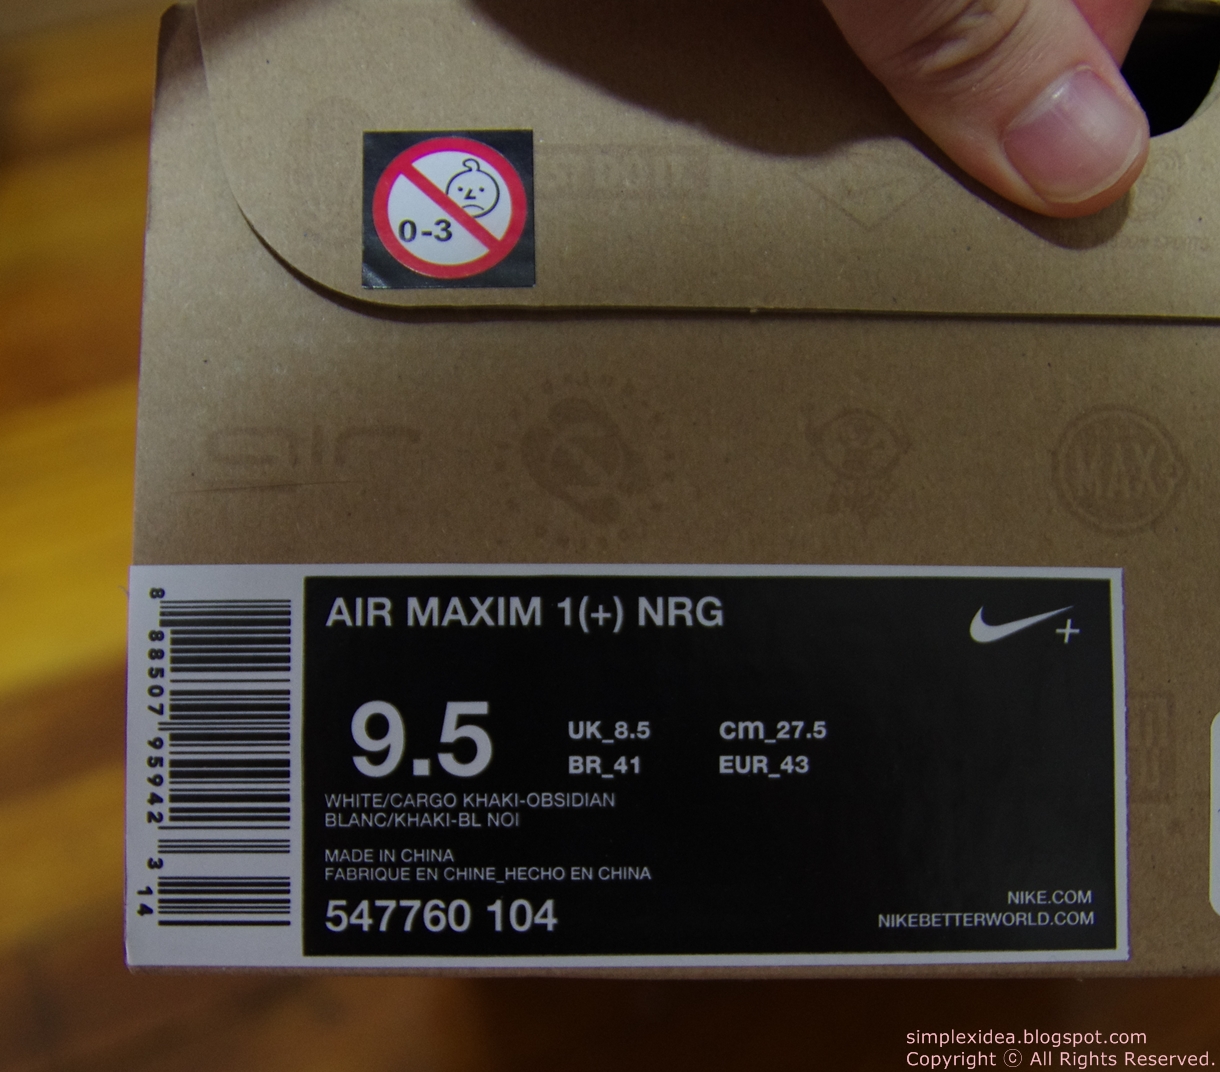 Nike Box Label Template - Pensandpieces With Regard To Nike Shoe Box Label Template